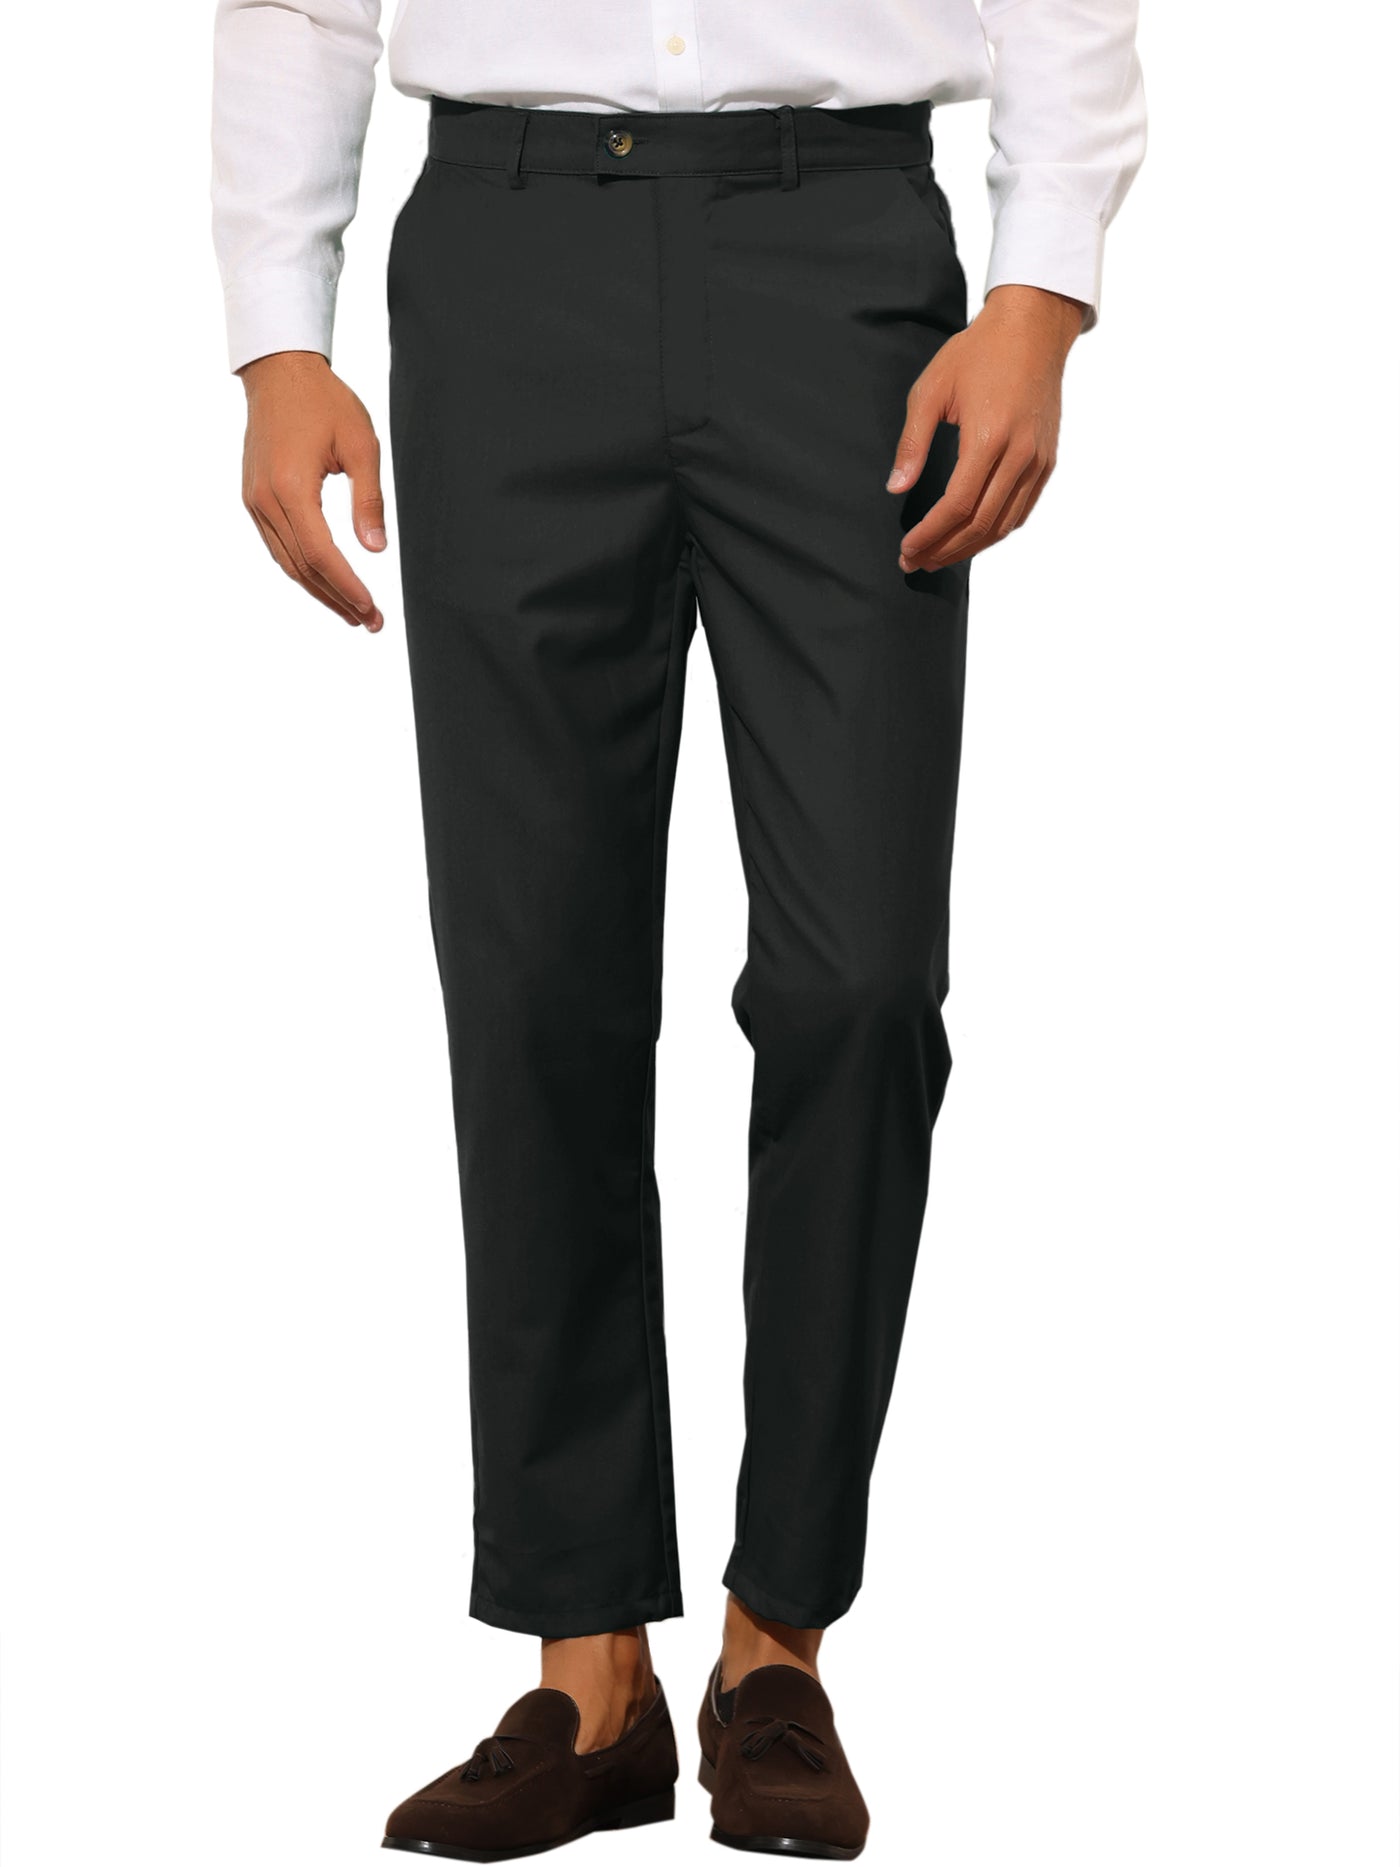 Bublédon Men's Cropped Solid Flat Front Business Prom Tapered Dress Pants